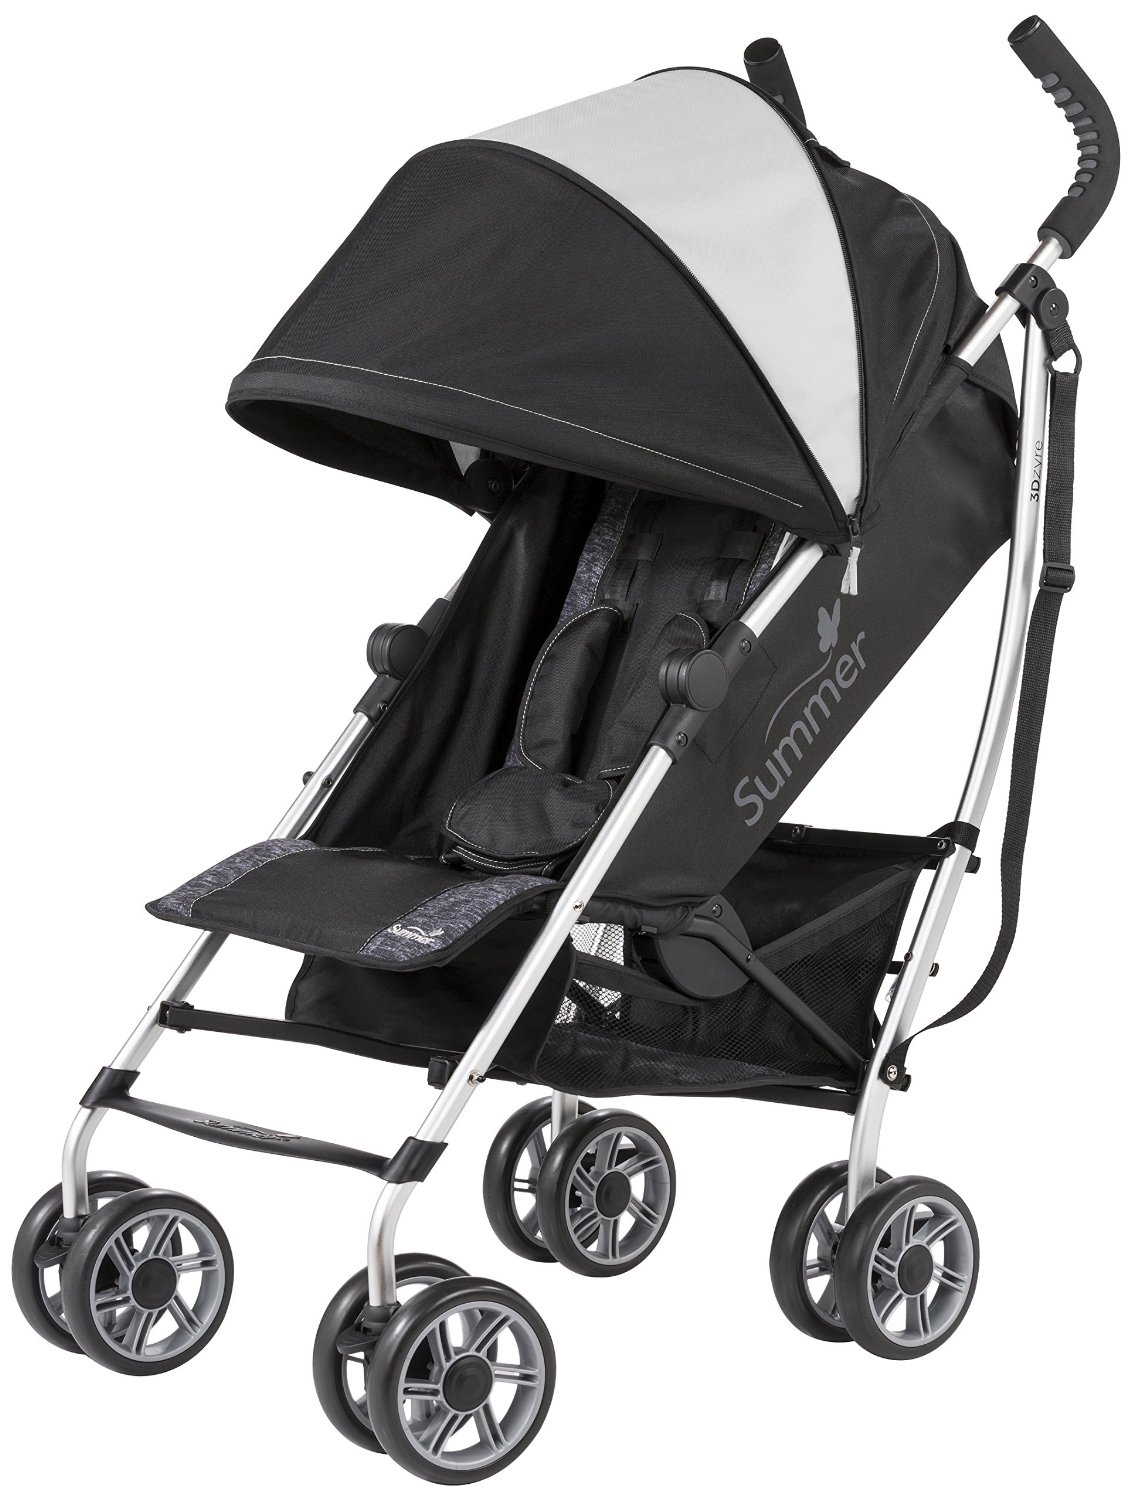 3DZyre Convenience Stroller Article in NeuFutur